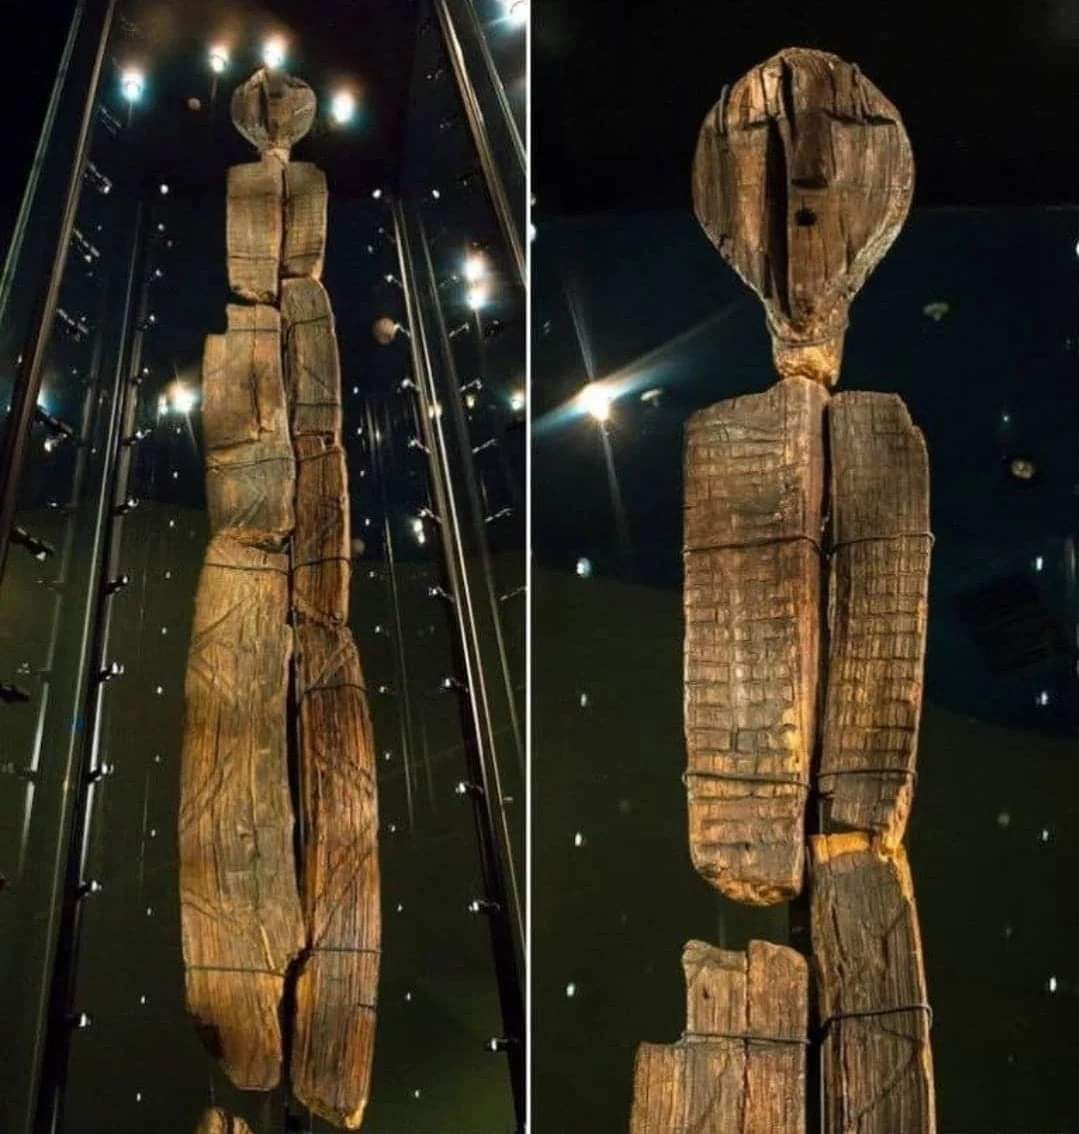 The Shigir Idol is the oldest known wooden sculpture in the world, made during the Mesolithic period, shortly after the end of the last Ice Age. The wood it was carved from is approximately 12,000 years old. The sculpture was discovered on January 24, 1890 at a depth of 4 m (13…